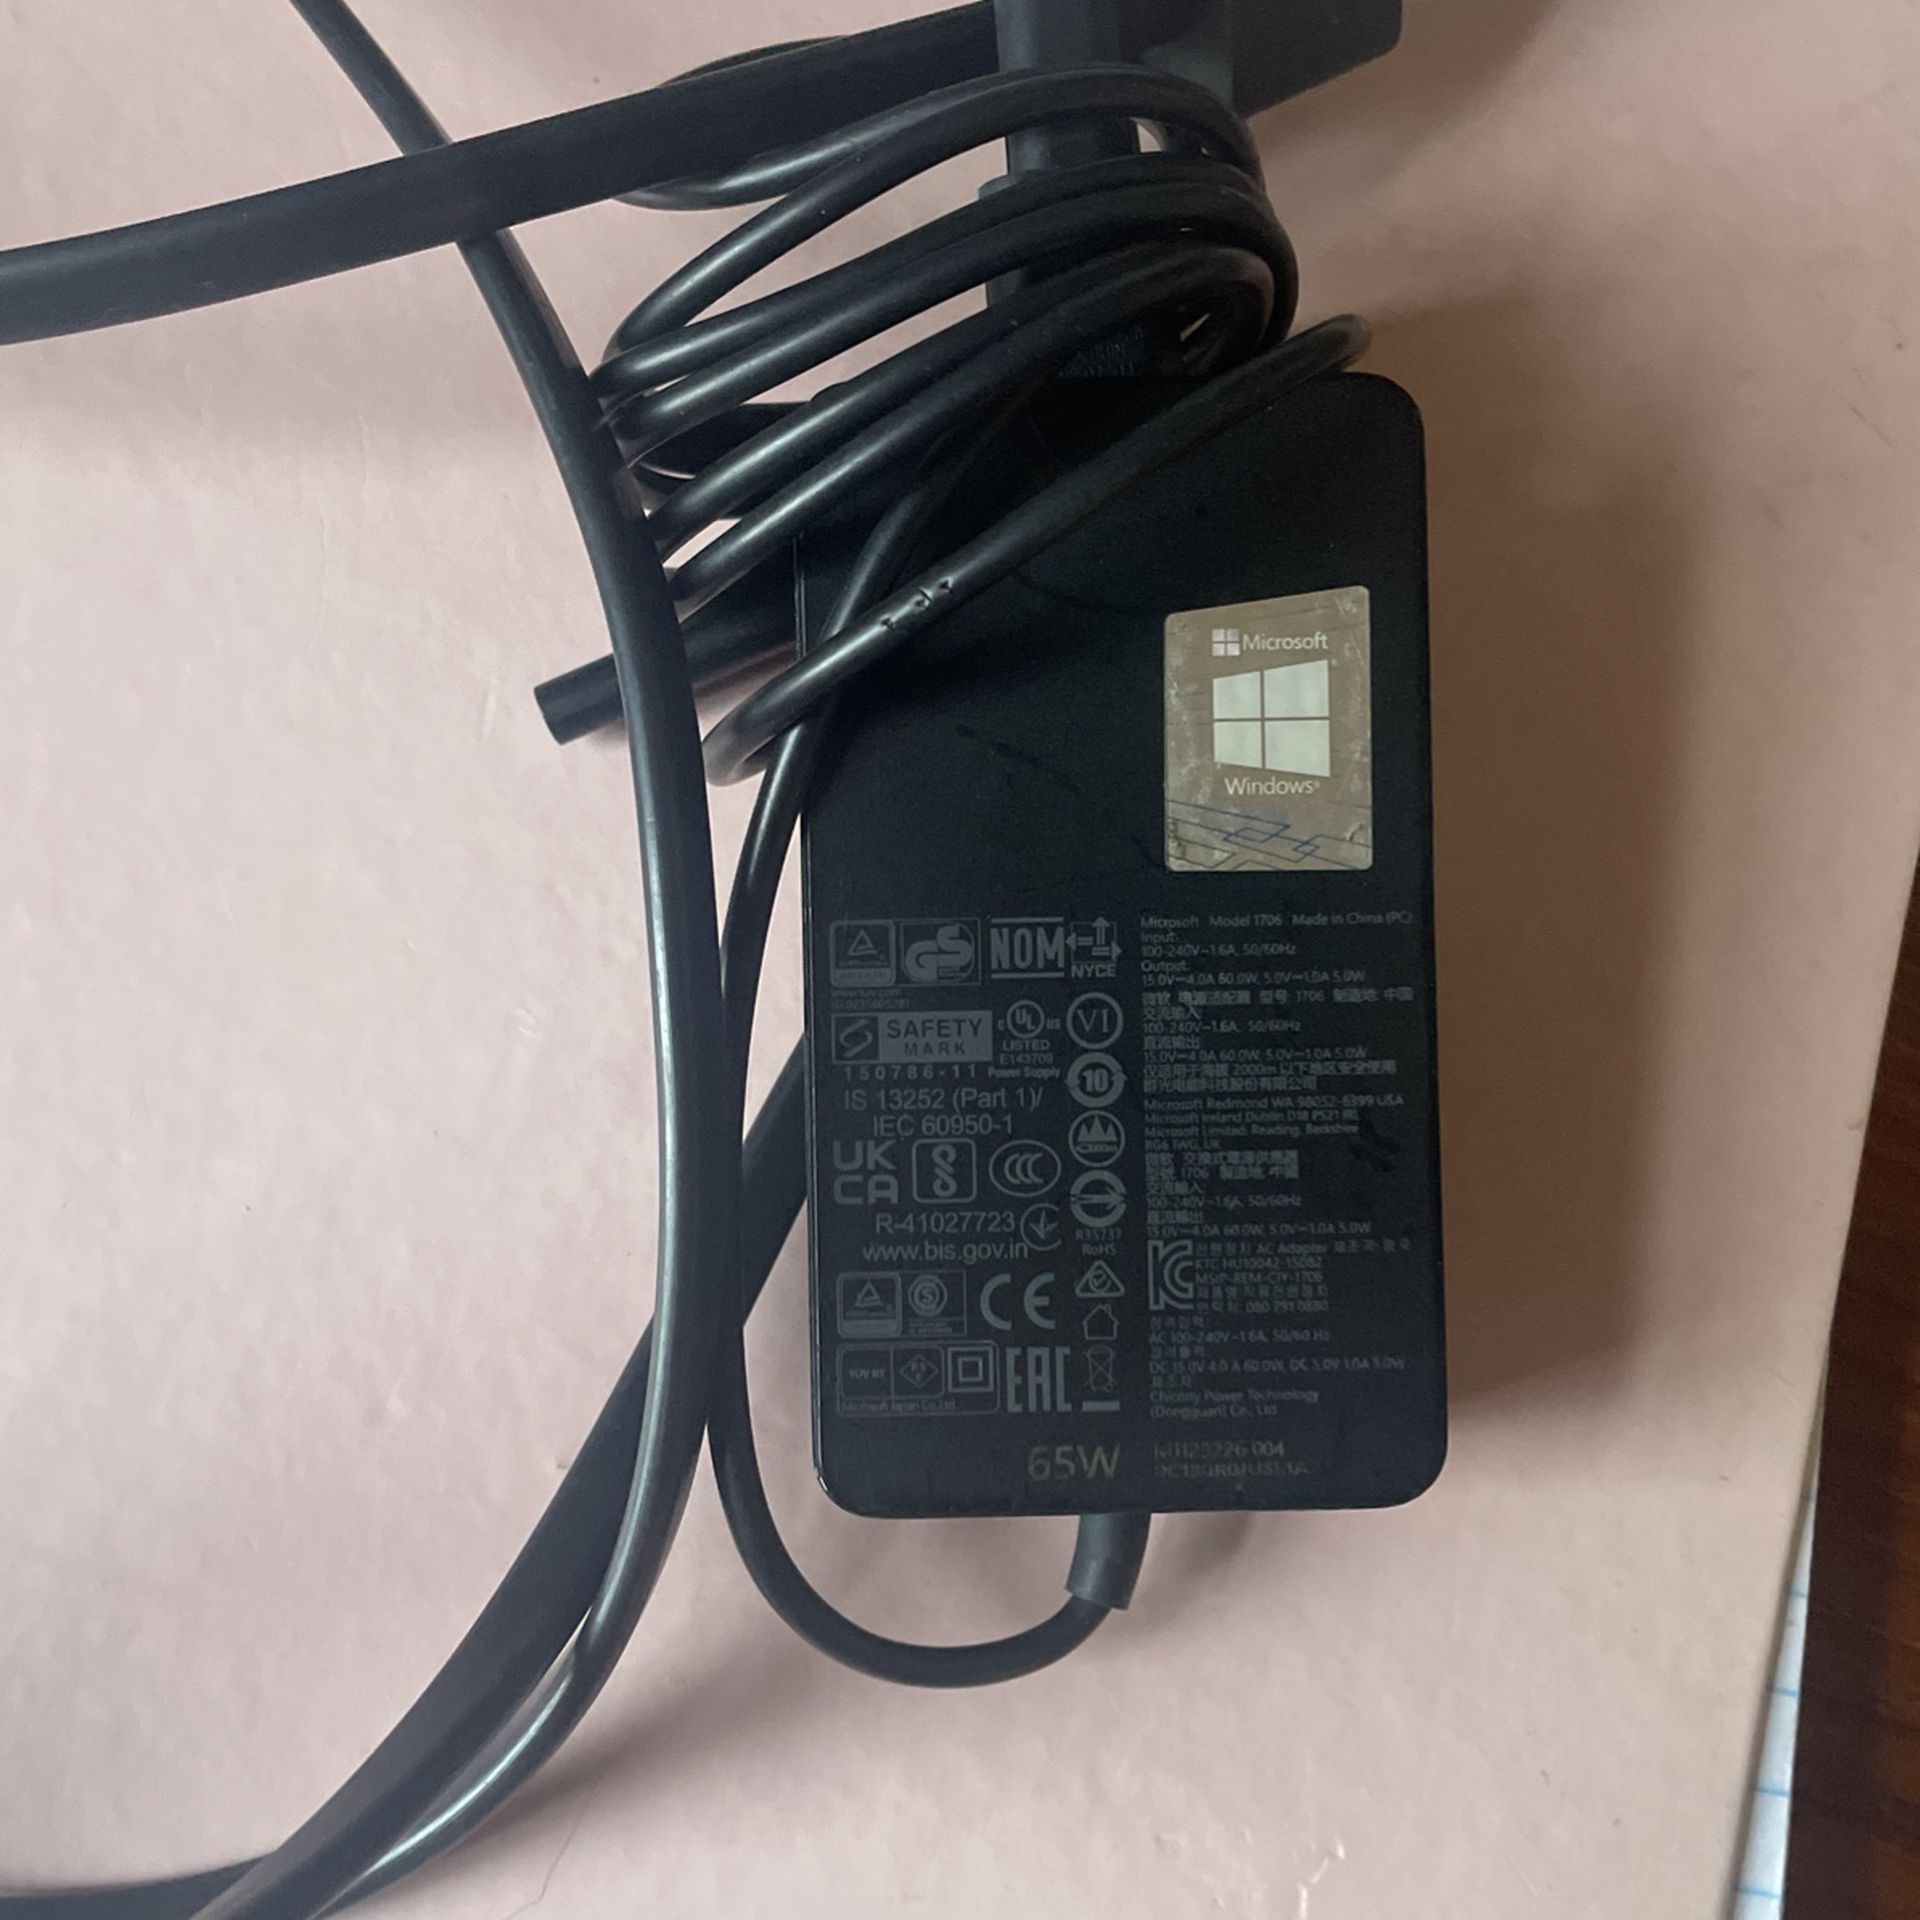 65W Microsoft surface laptop charger 